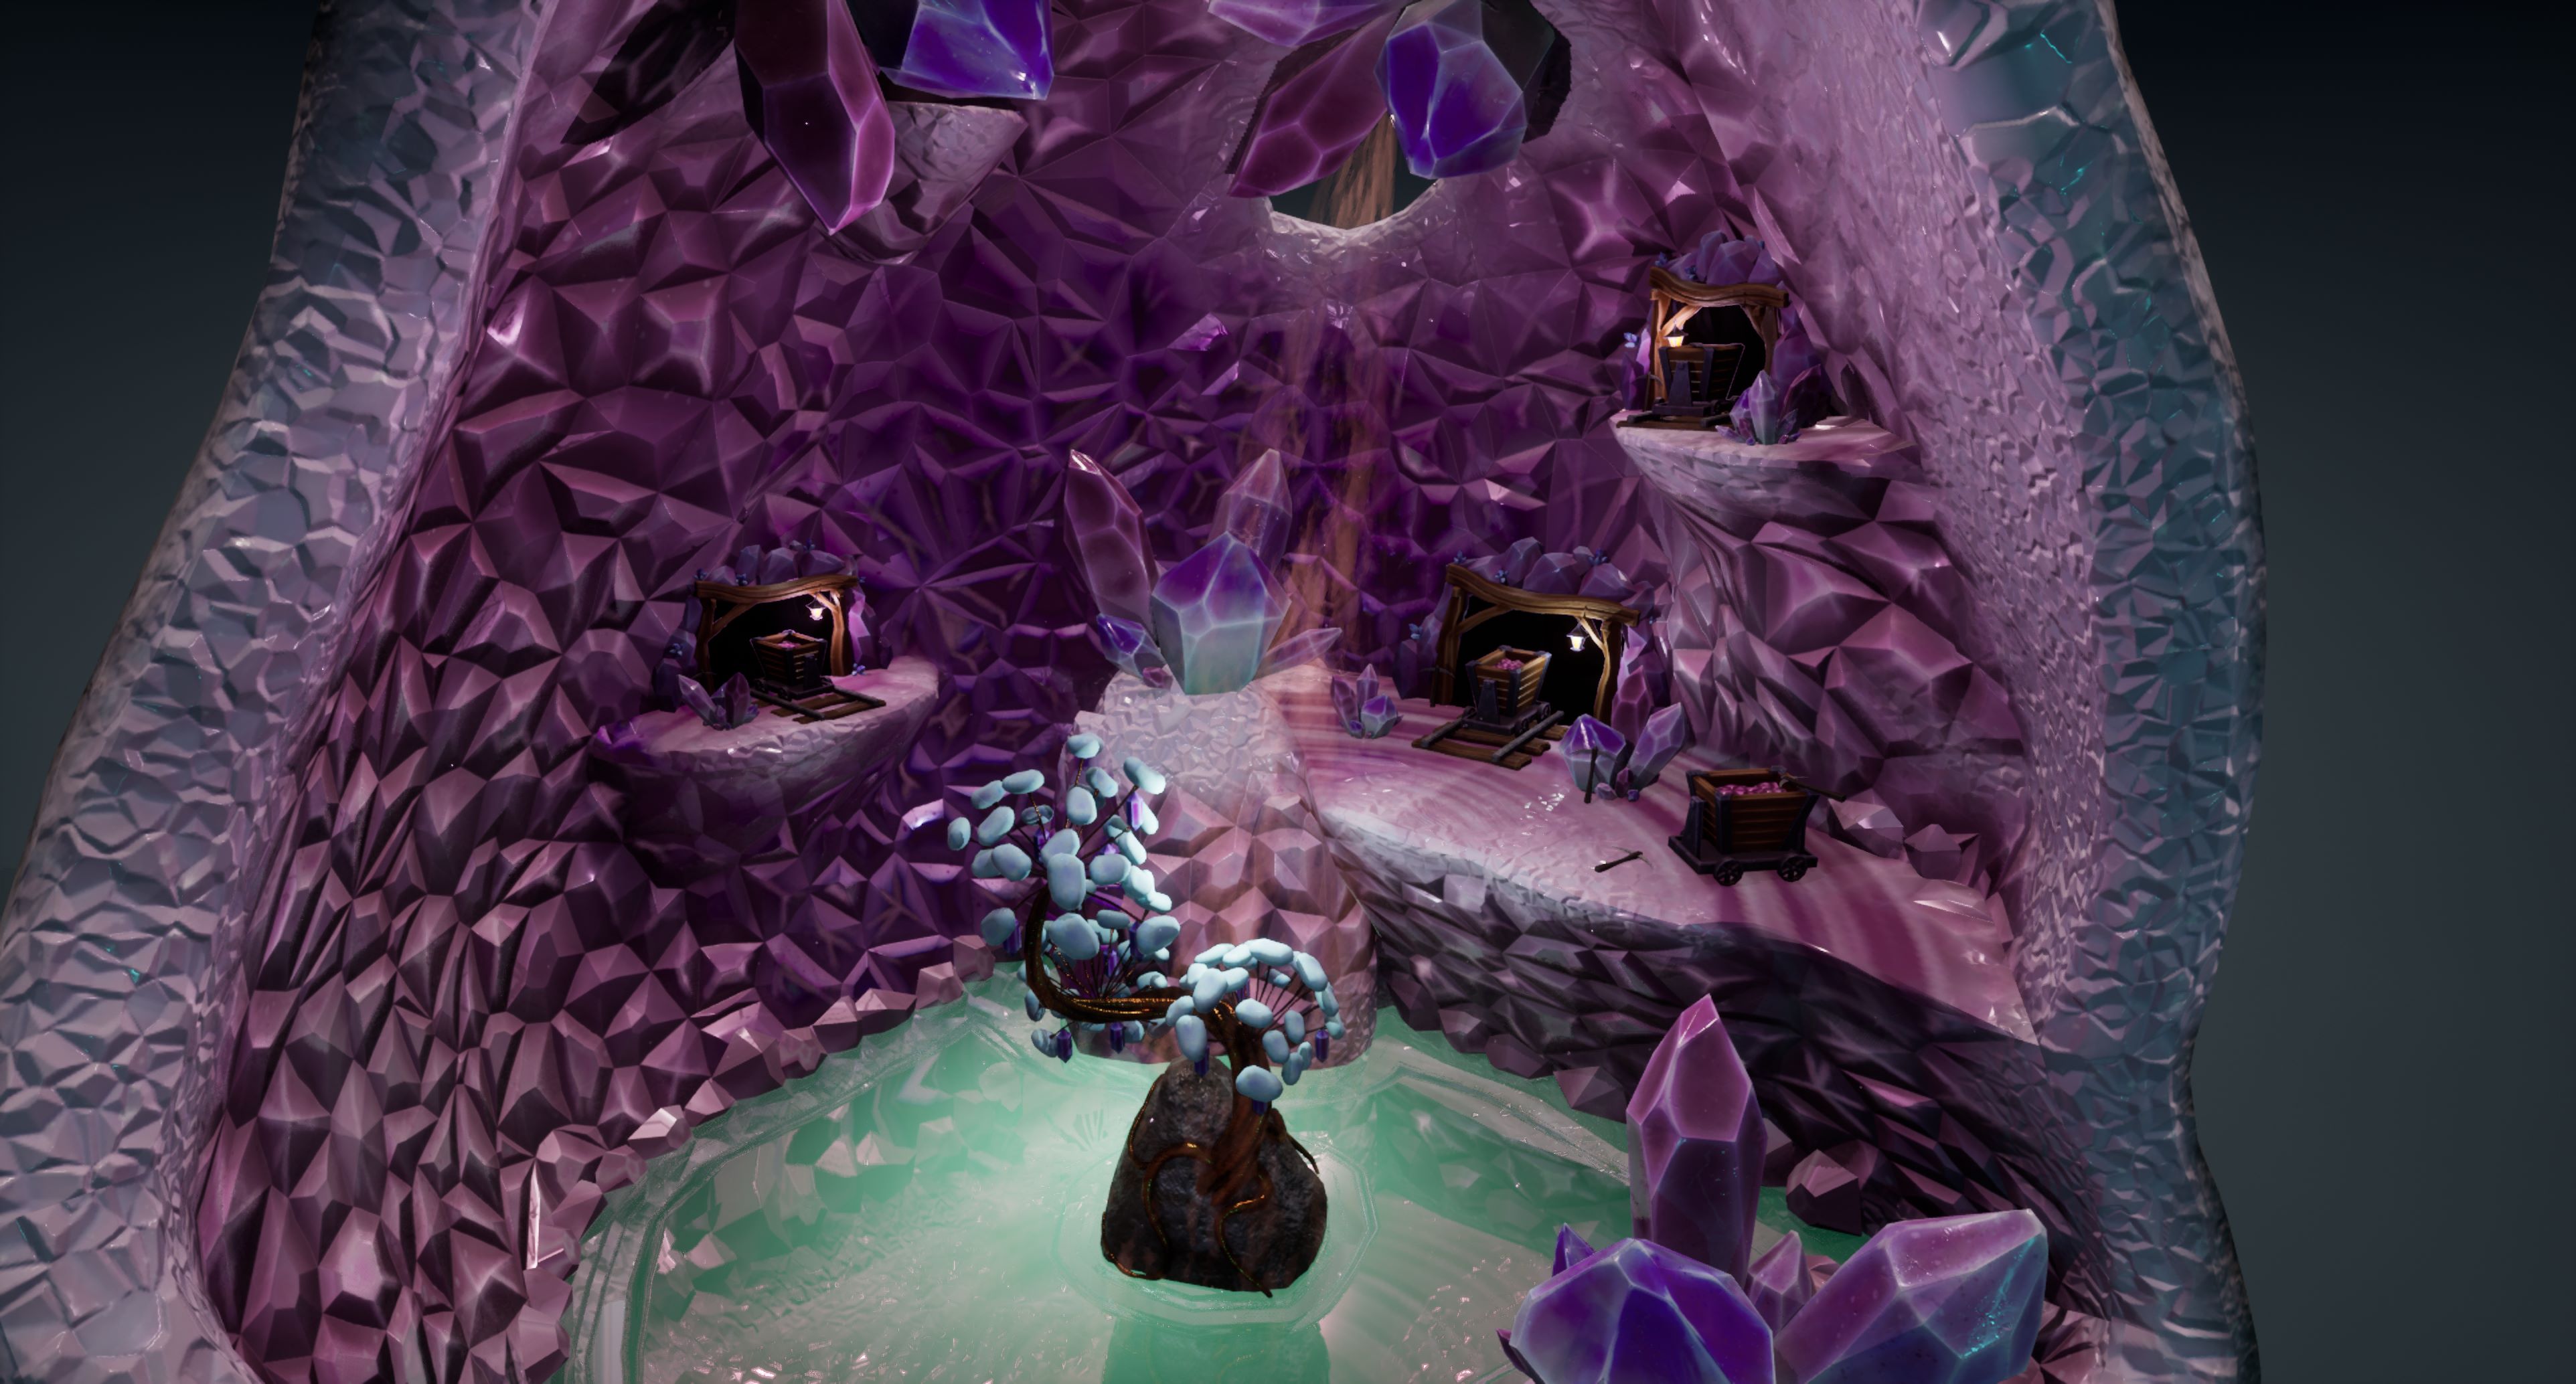 Close up view of 3D Art by Megan Griib, showing a crystal geode housing a mine.